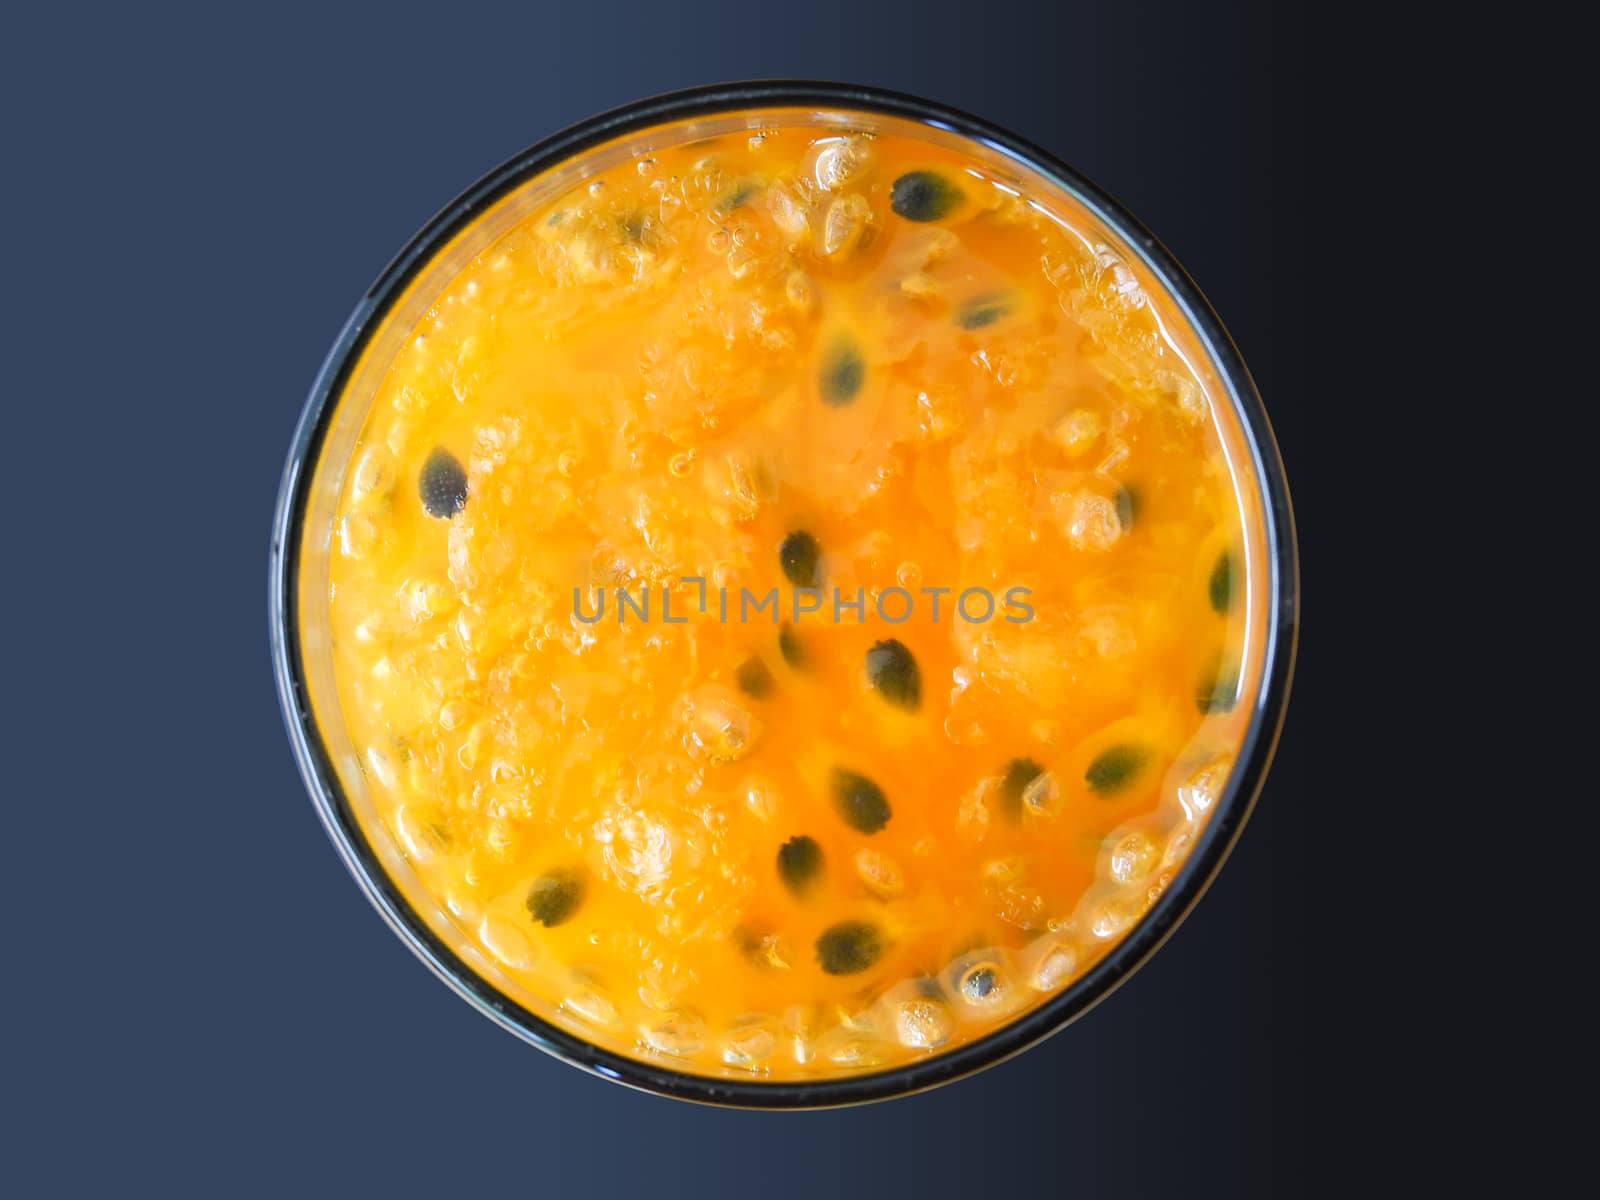 Top view of glass drink with yellow passion fruit juice and black seeds, fresh fruit juice in summer isolated on dark background.